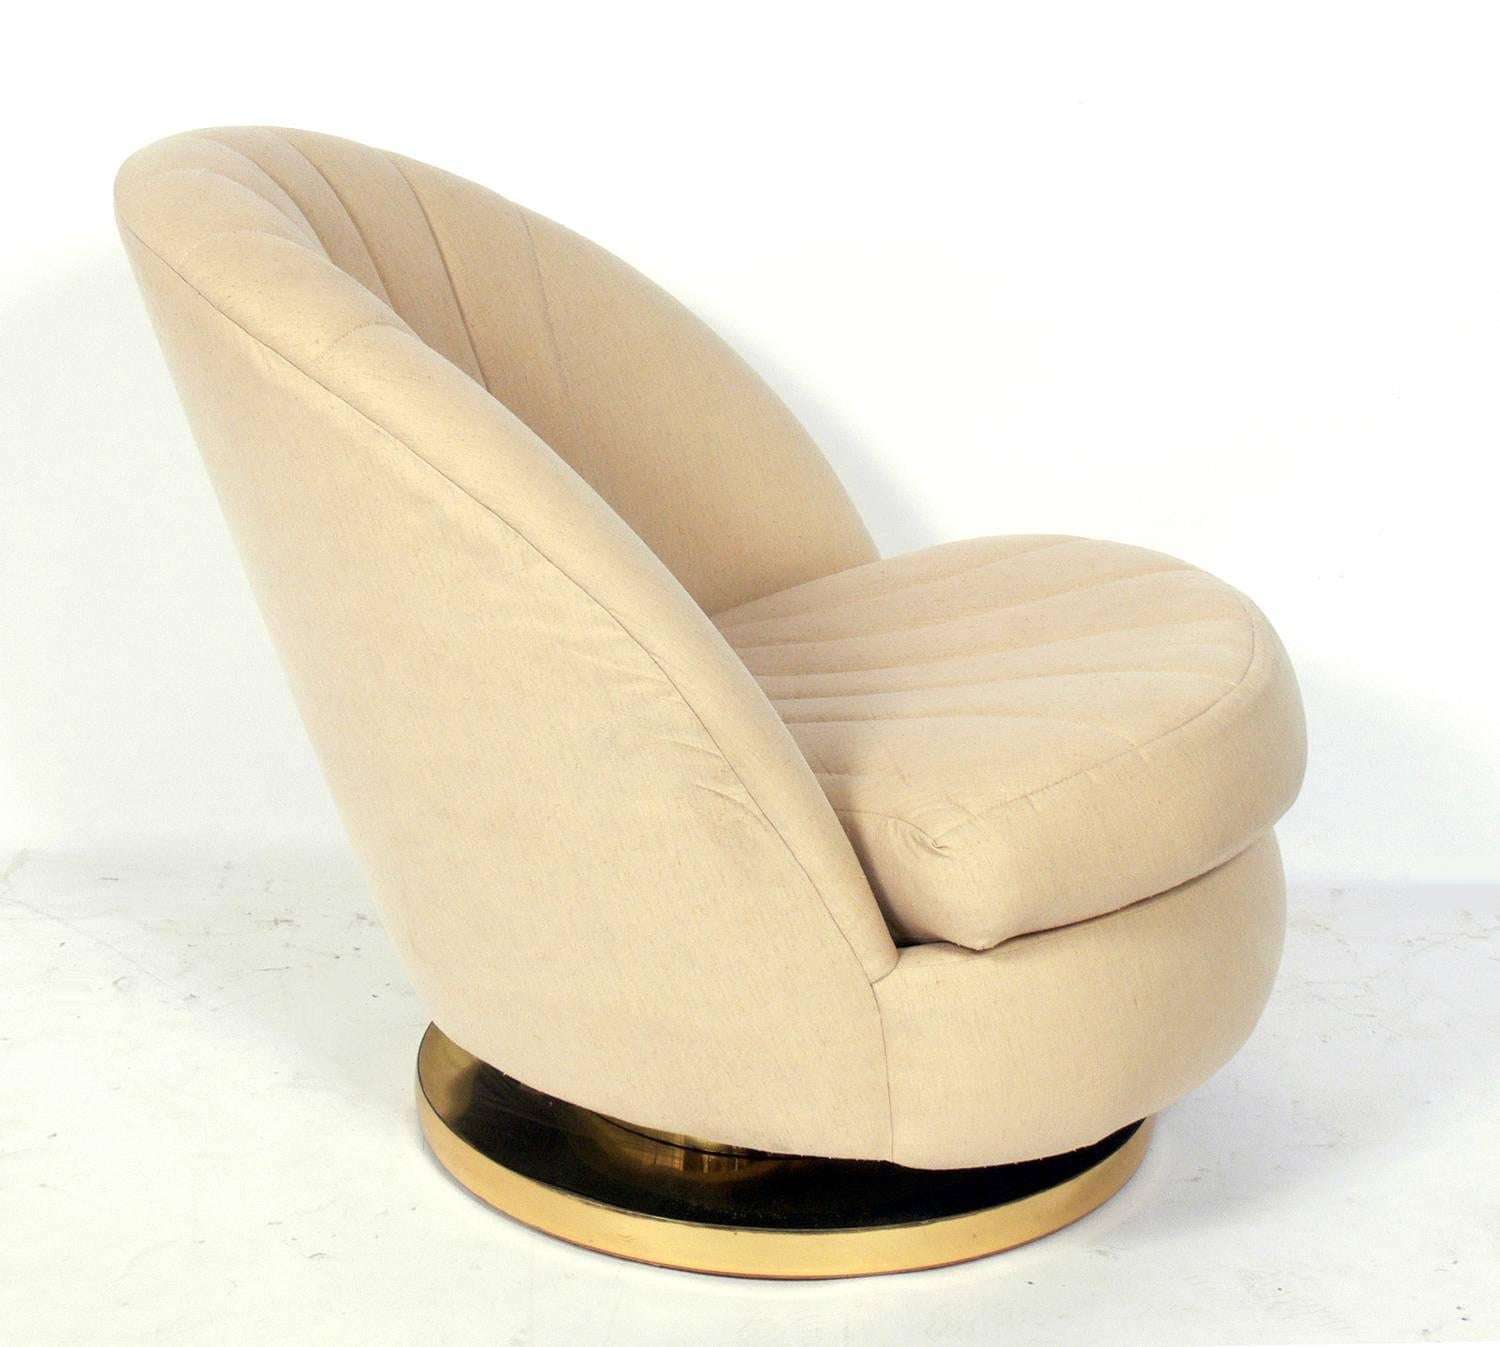 Pair of modern swivel lounge chairs, designed by Milo Baughman for Thayer Coggin, circa 1980s. These chairs are currently being reupholstered and can be completed in your fabric. The price noted below Includes reupholstery in your fabric.